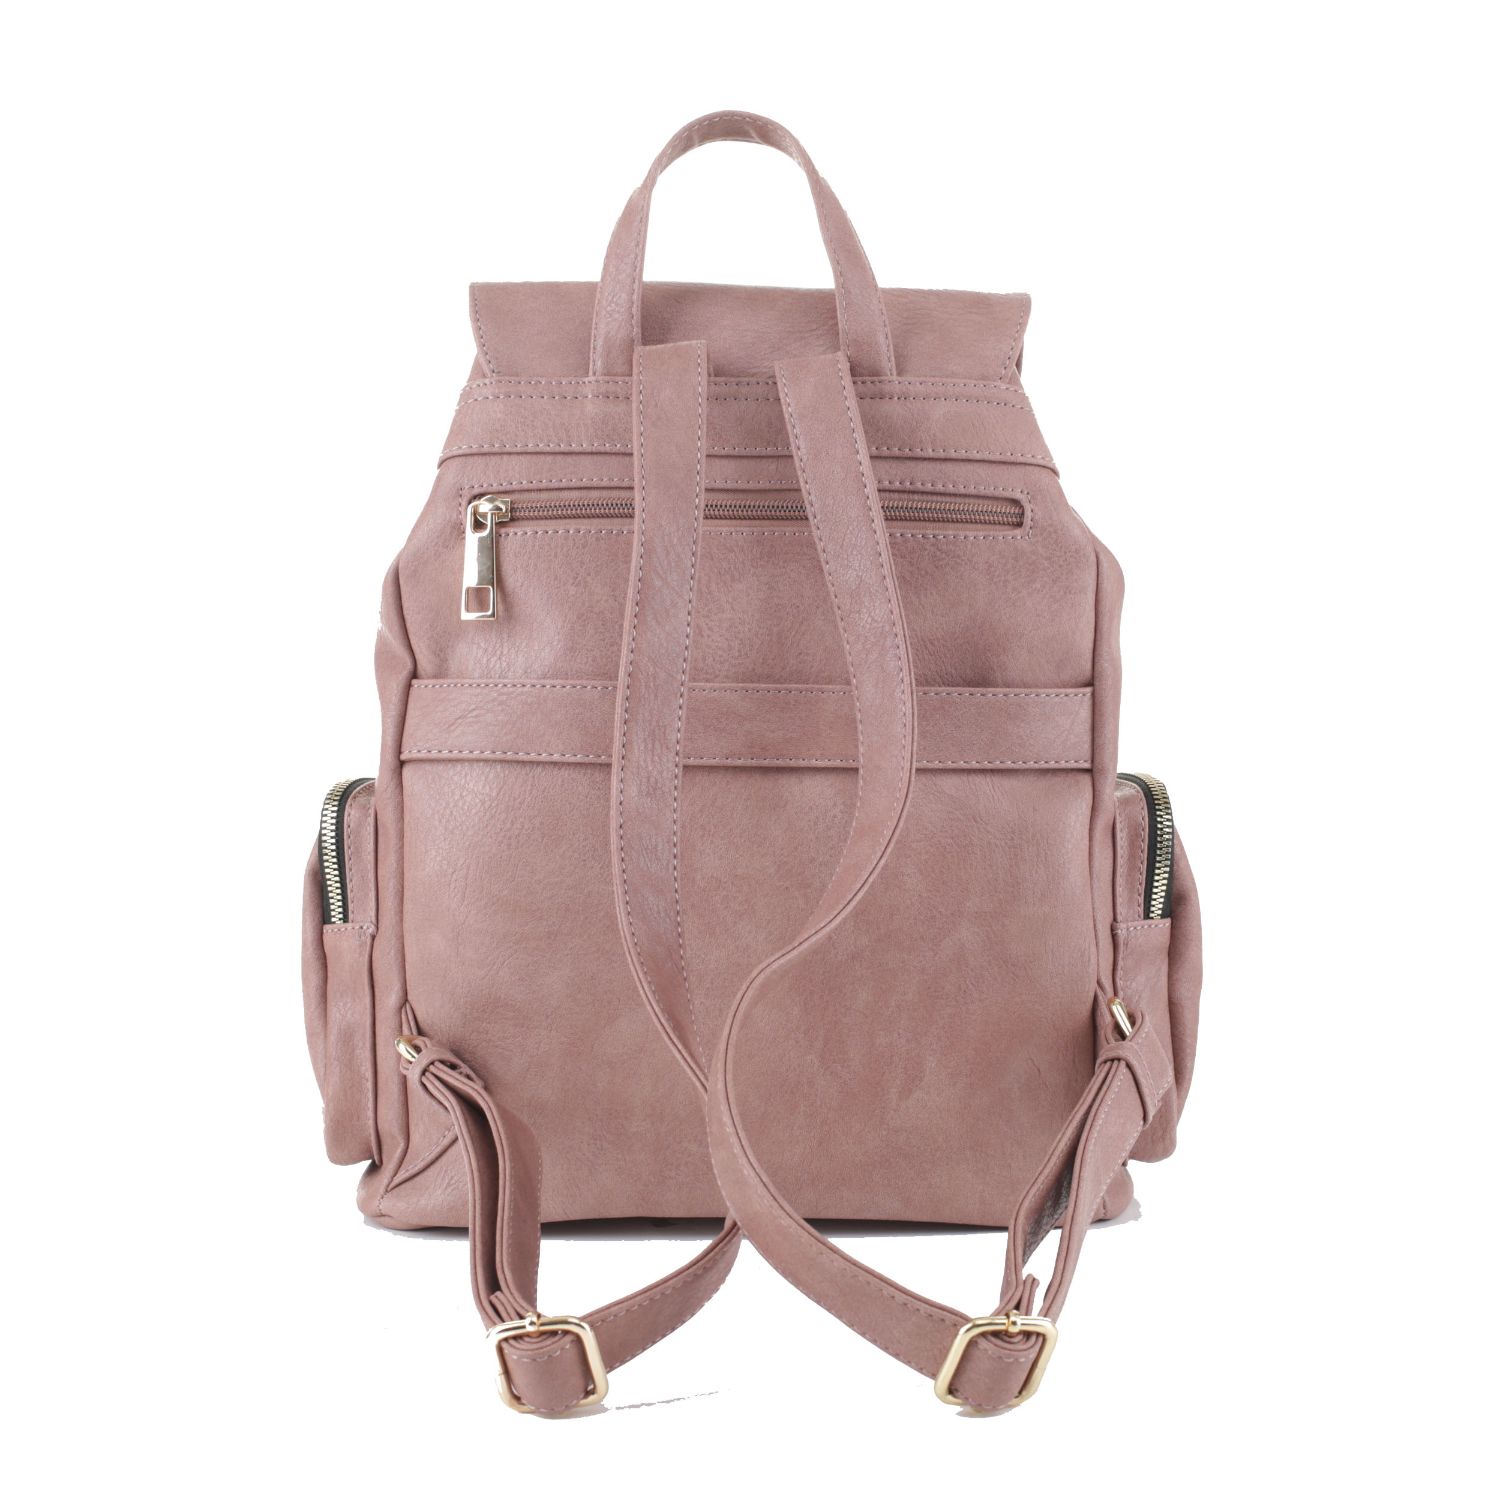 MKF Collection Caroline Backpack by Mia K. - image 2 of 3